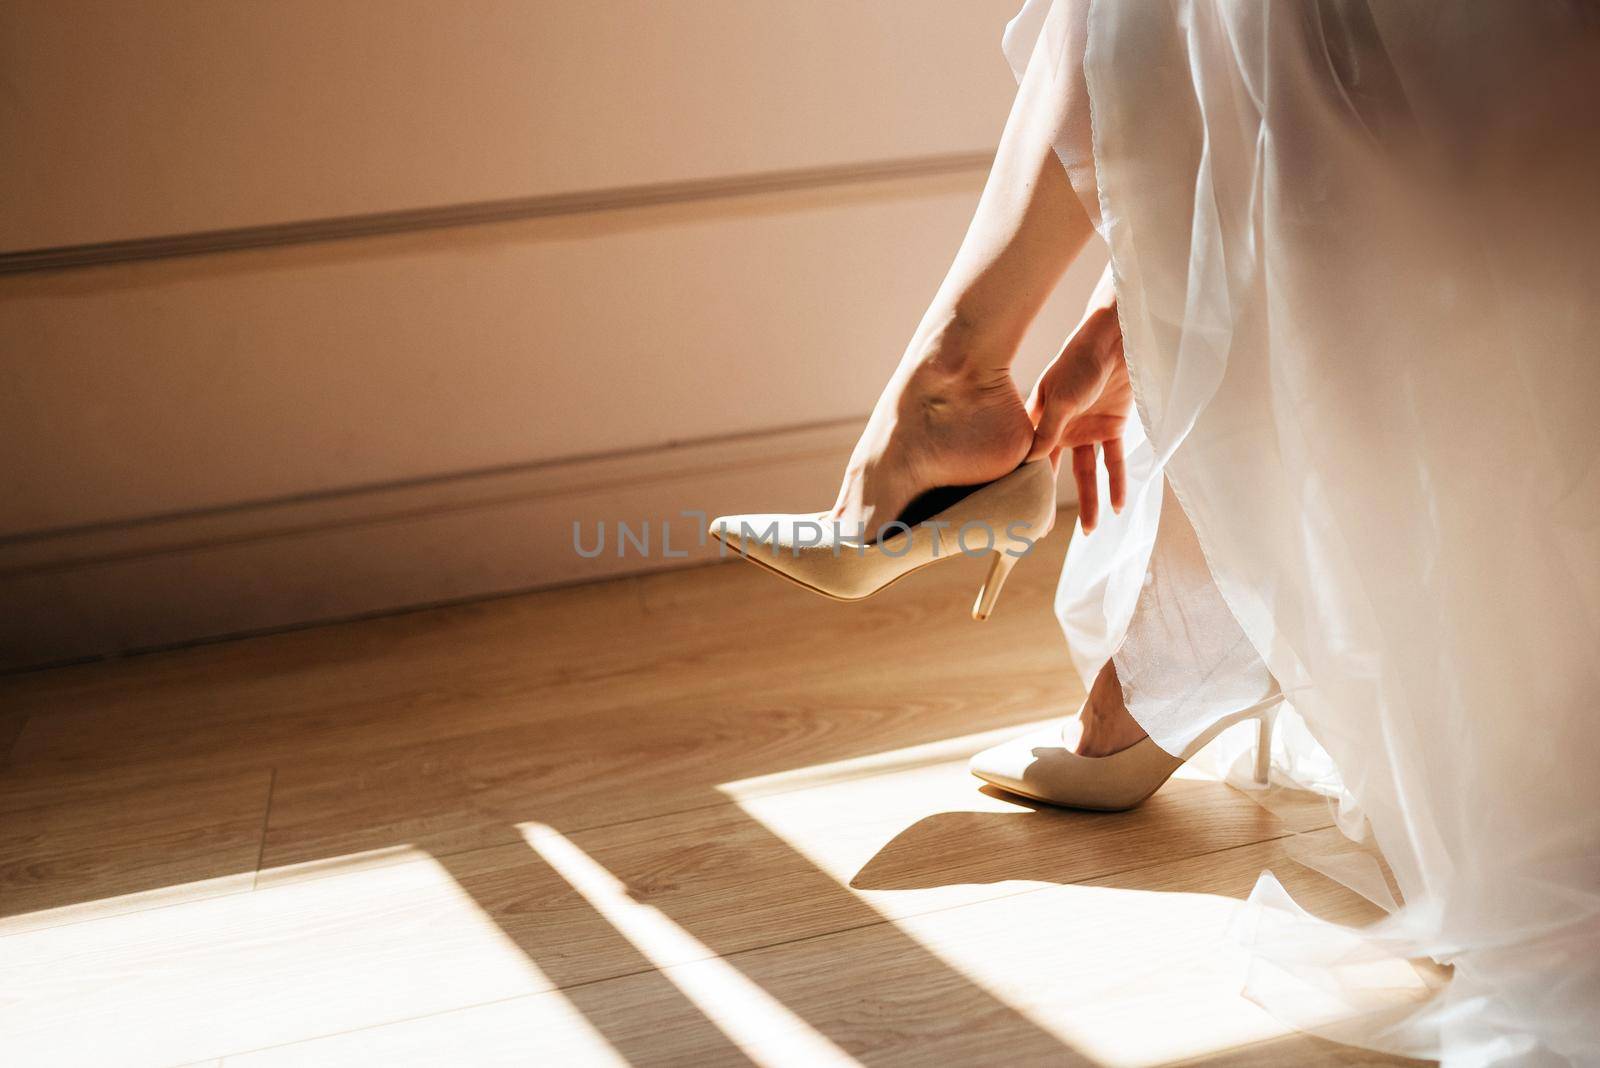 Bride taking off her shoes after wedding, romantic concept